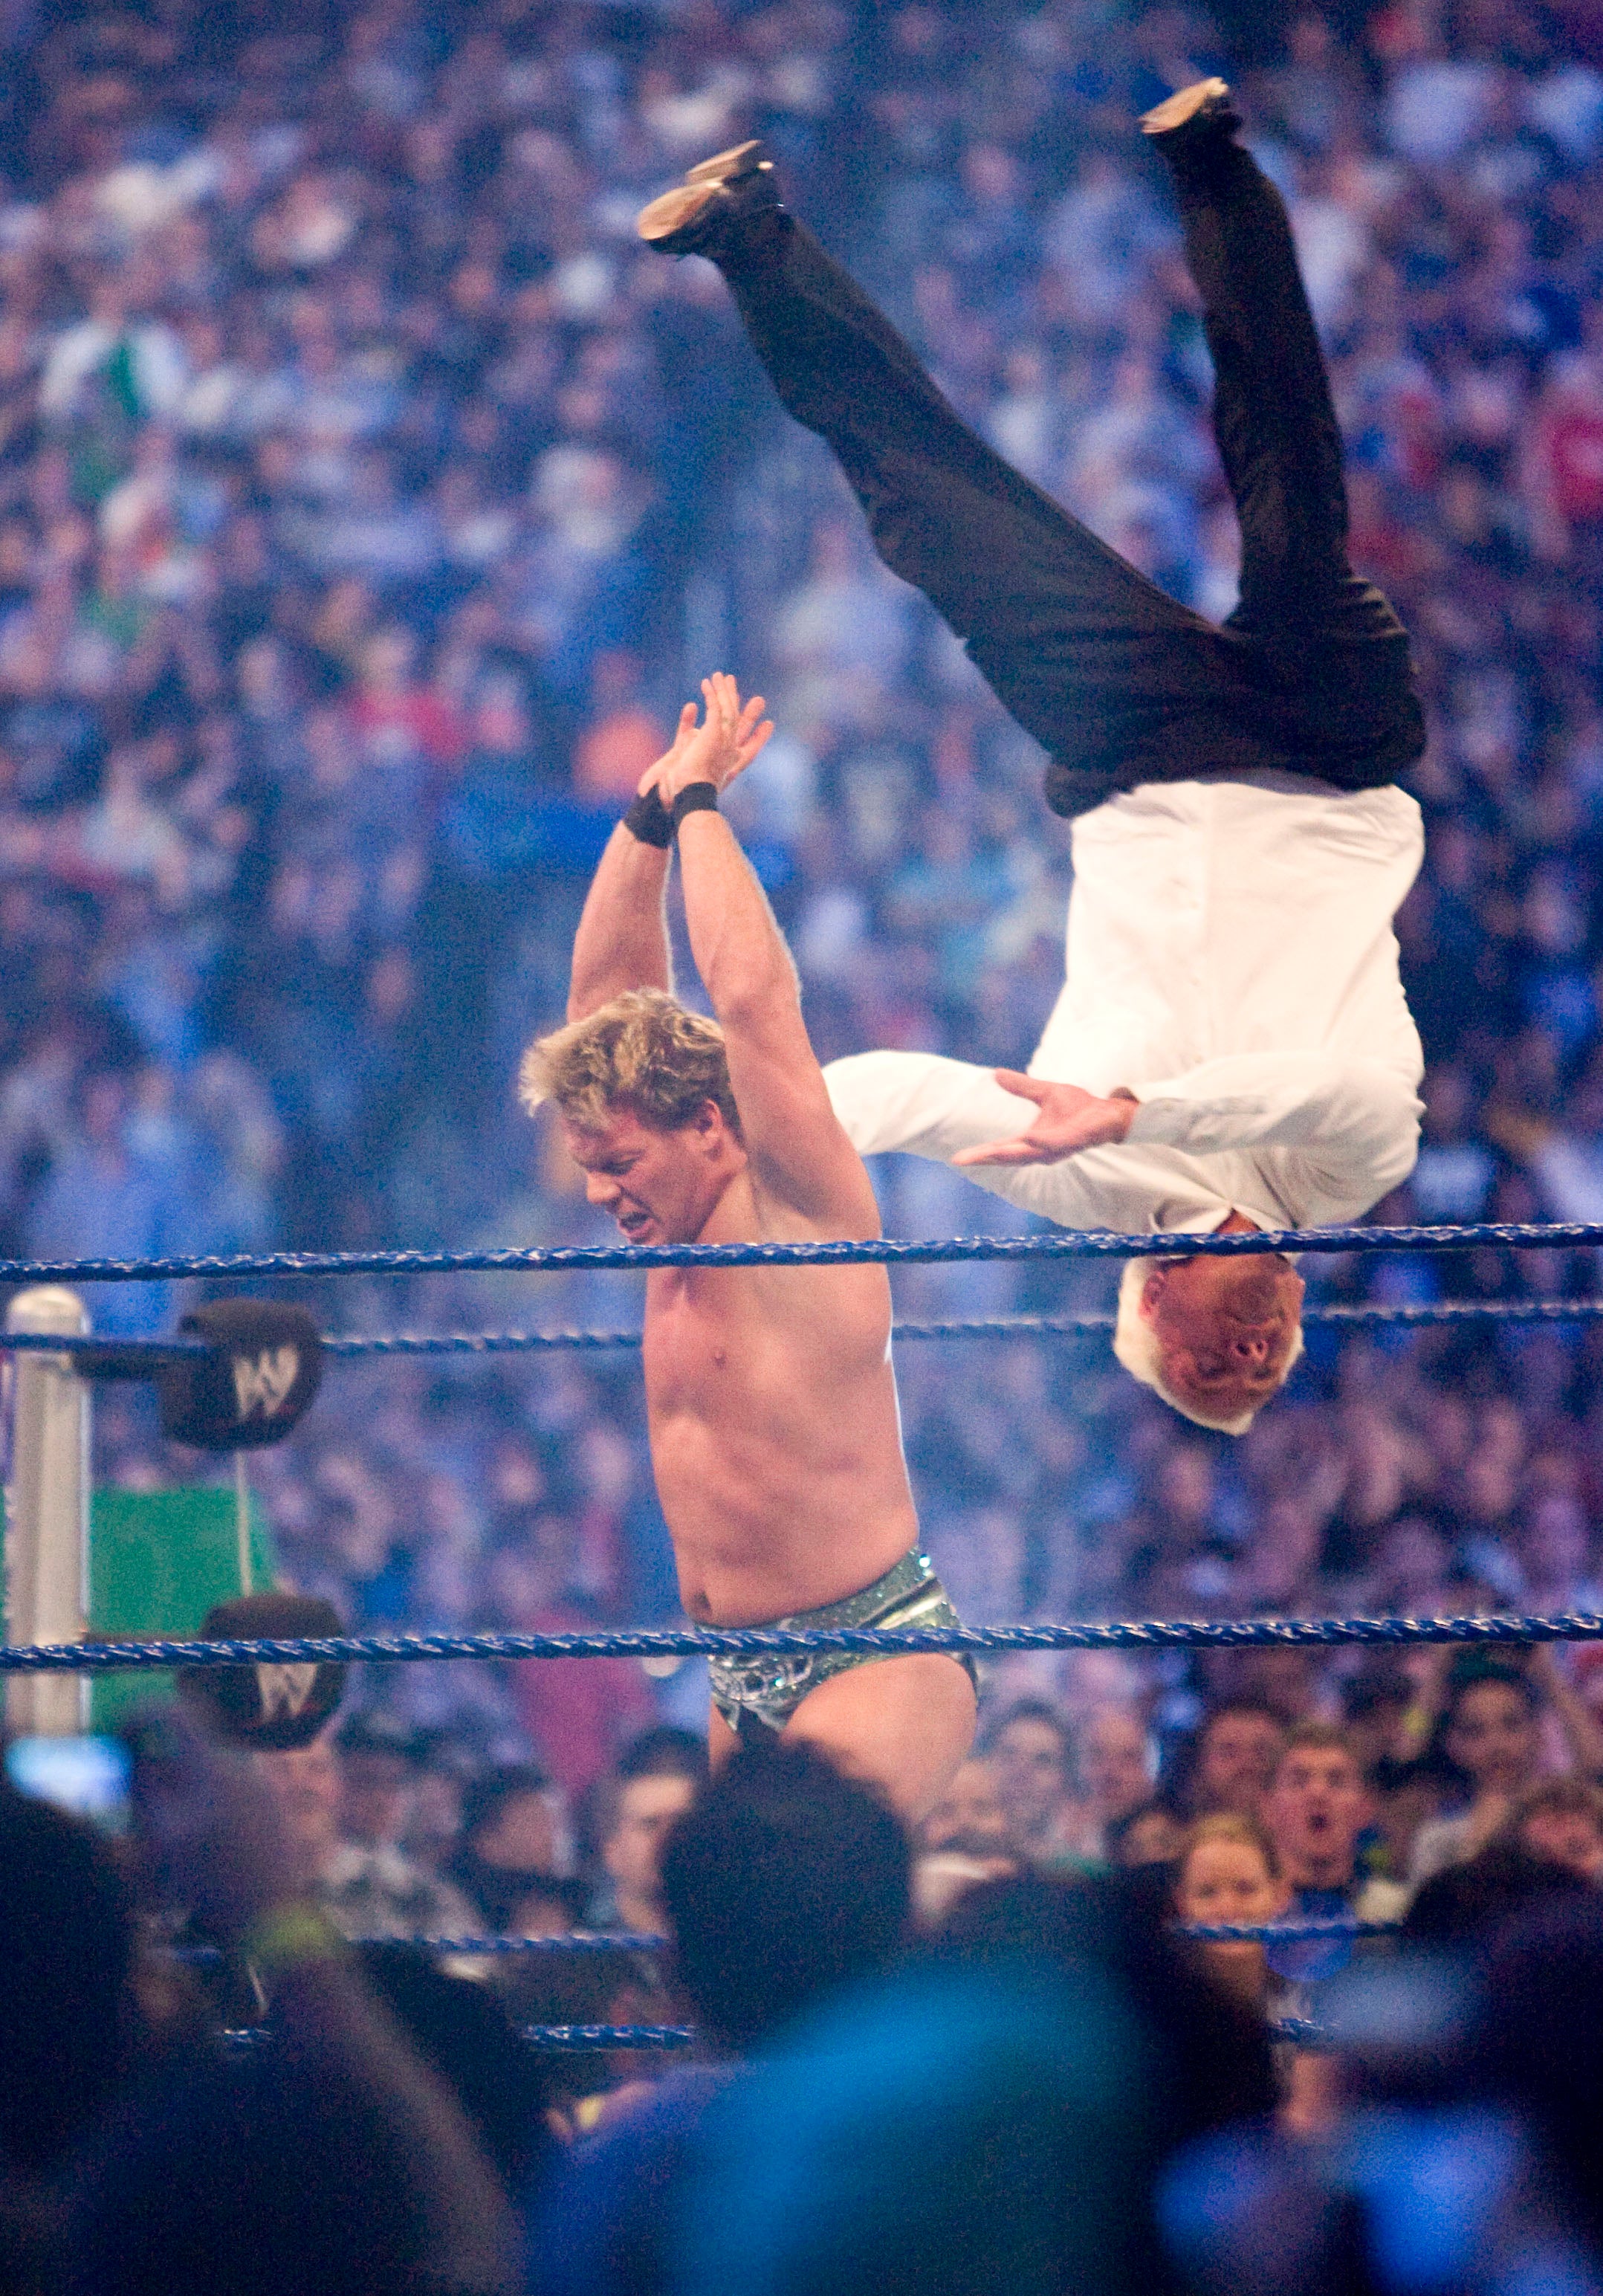 The WWE Network will provide access to archived pay per view content such as Wrestlemania (above - Ric Flair is thrown into the air by Chris Jericho in 2009). Credit: Getty Images.